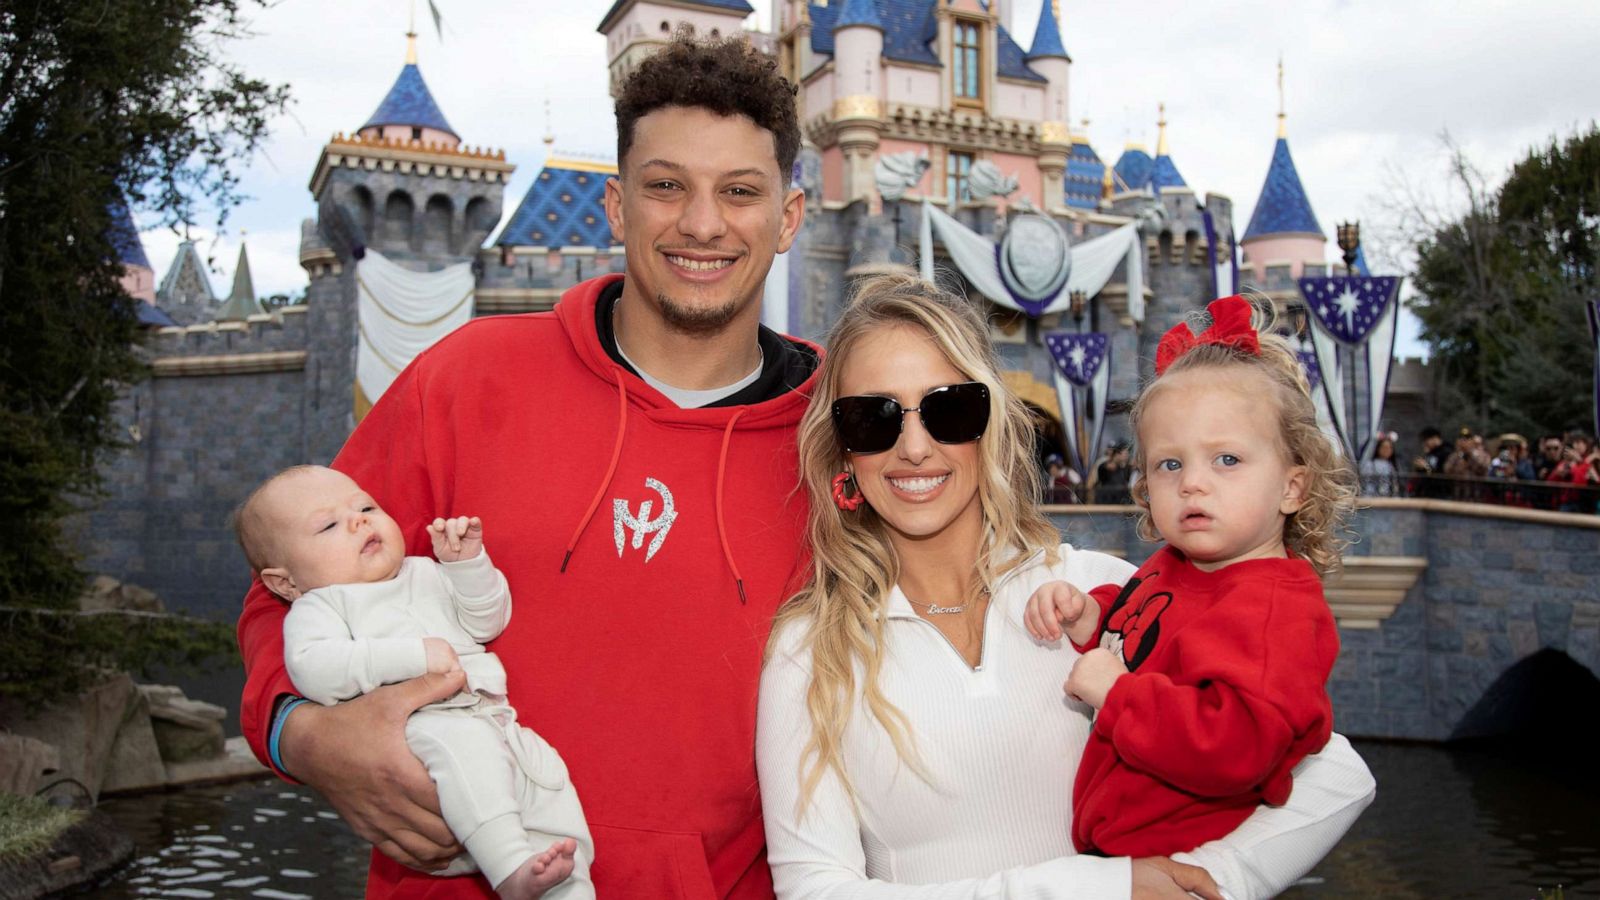 Pat Mahomes on his son learning, 01/29/2020